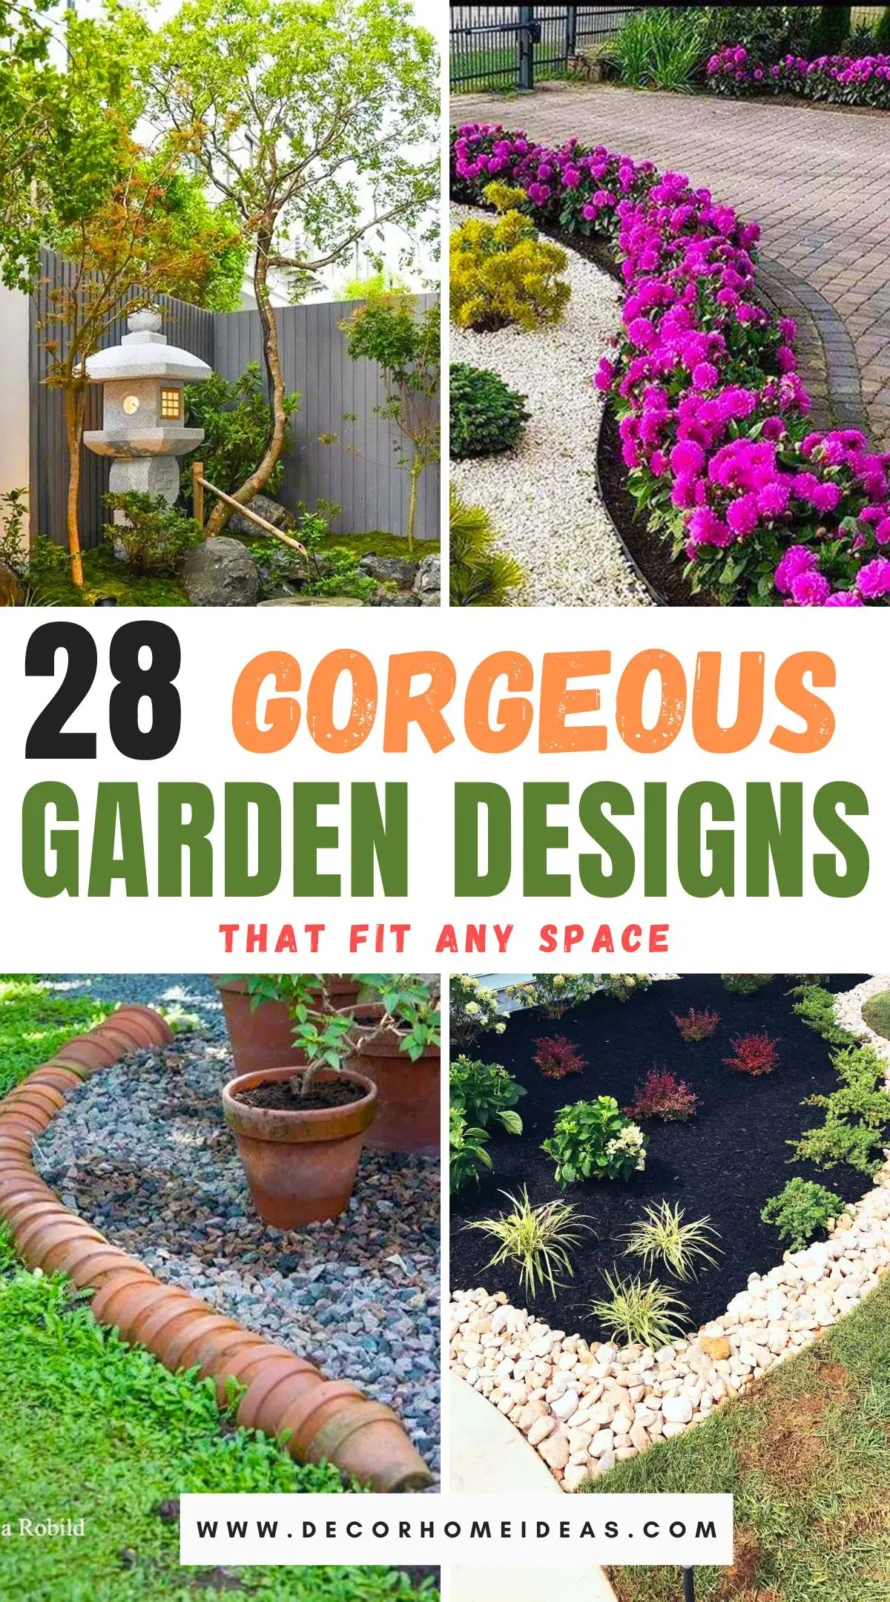 Explore 28 stunning garden designs perfect for any space, big or small. These ideas blend beauty and functionality, offering creative ways to enhance your outdoor area. Get ready to transform your garden into a picturesque oasis!